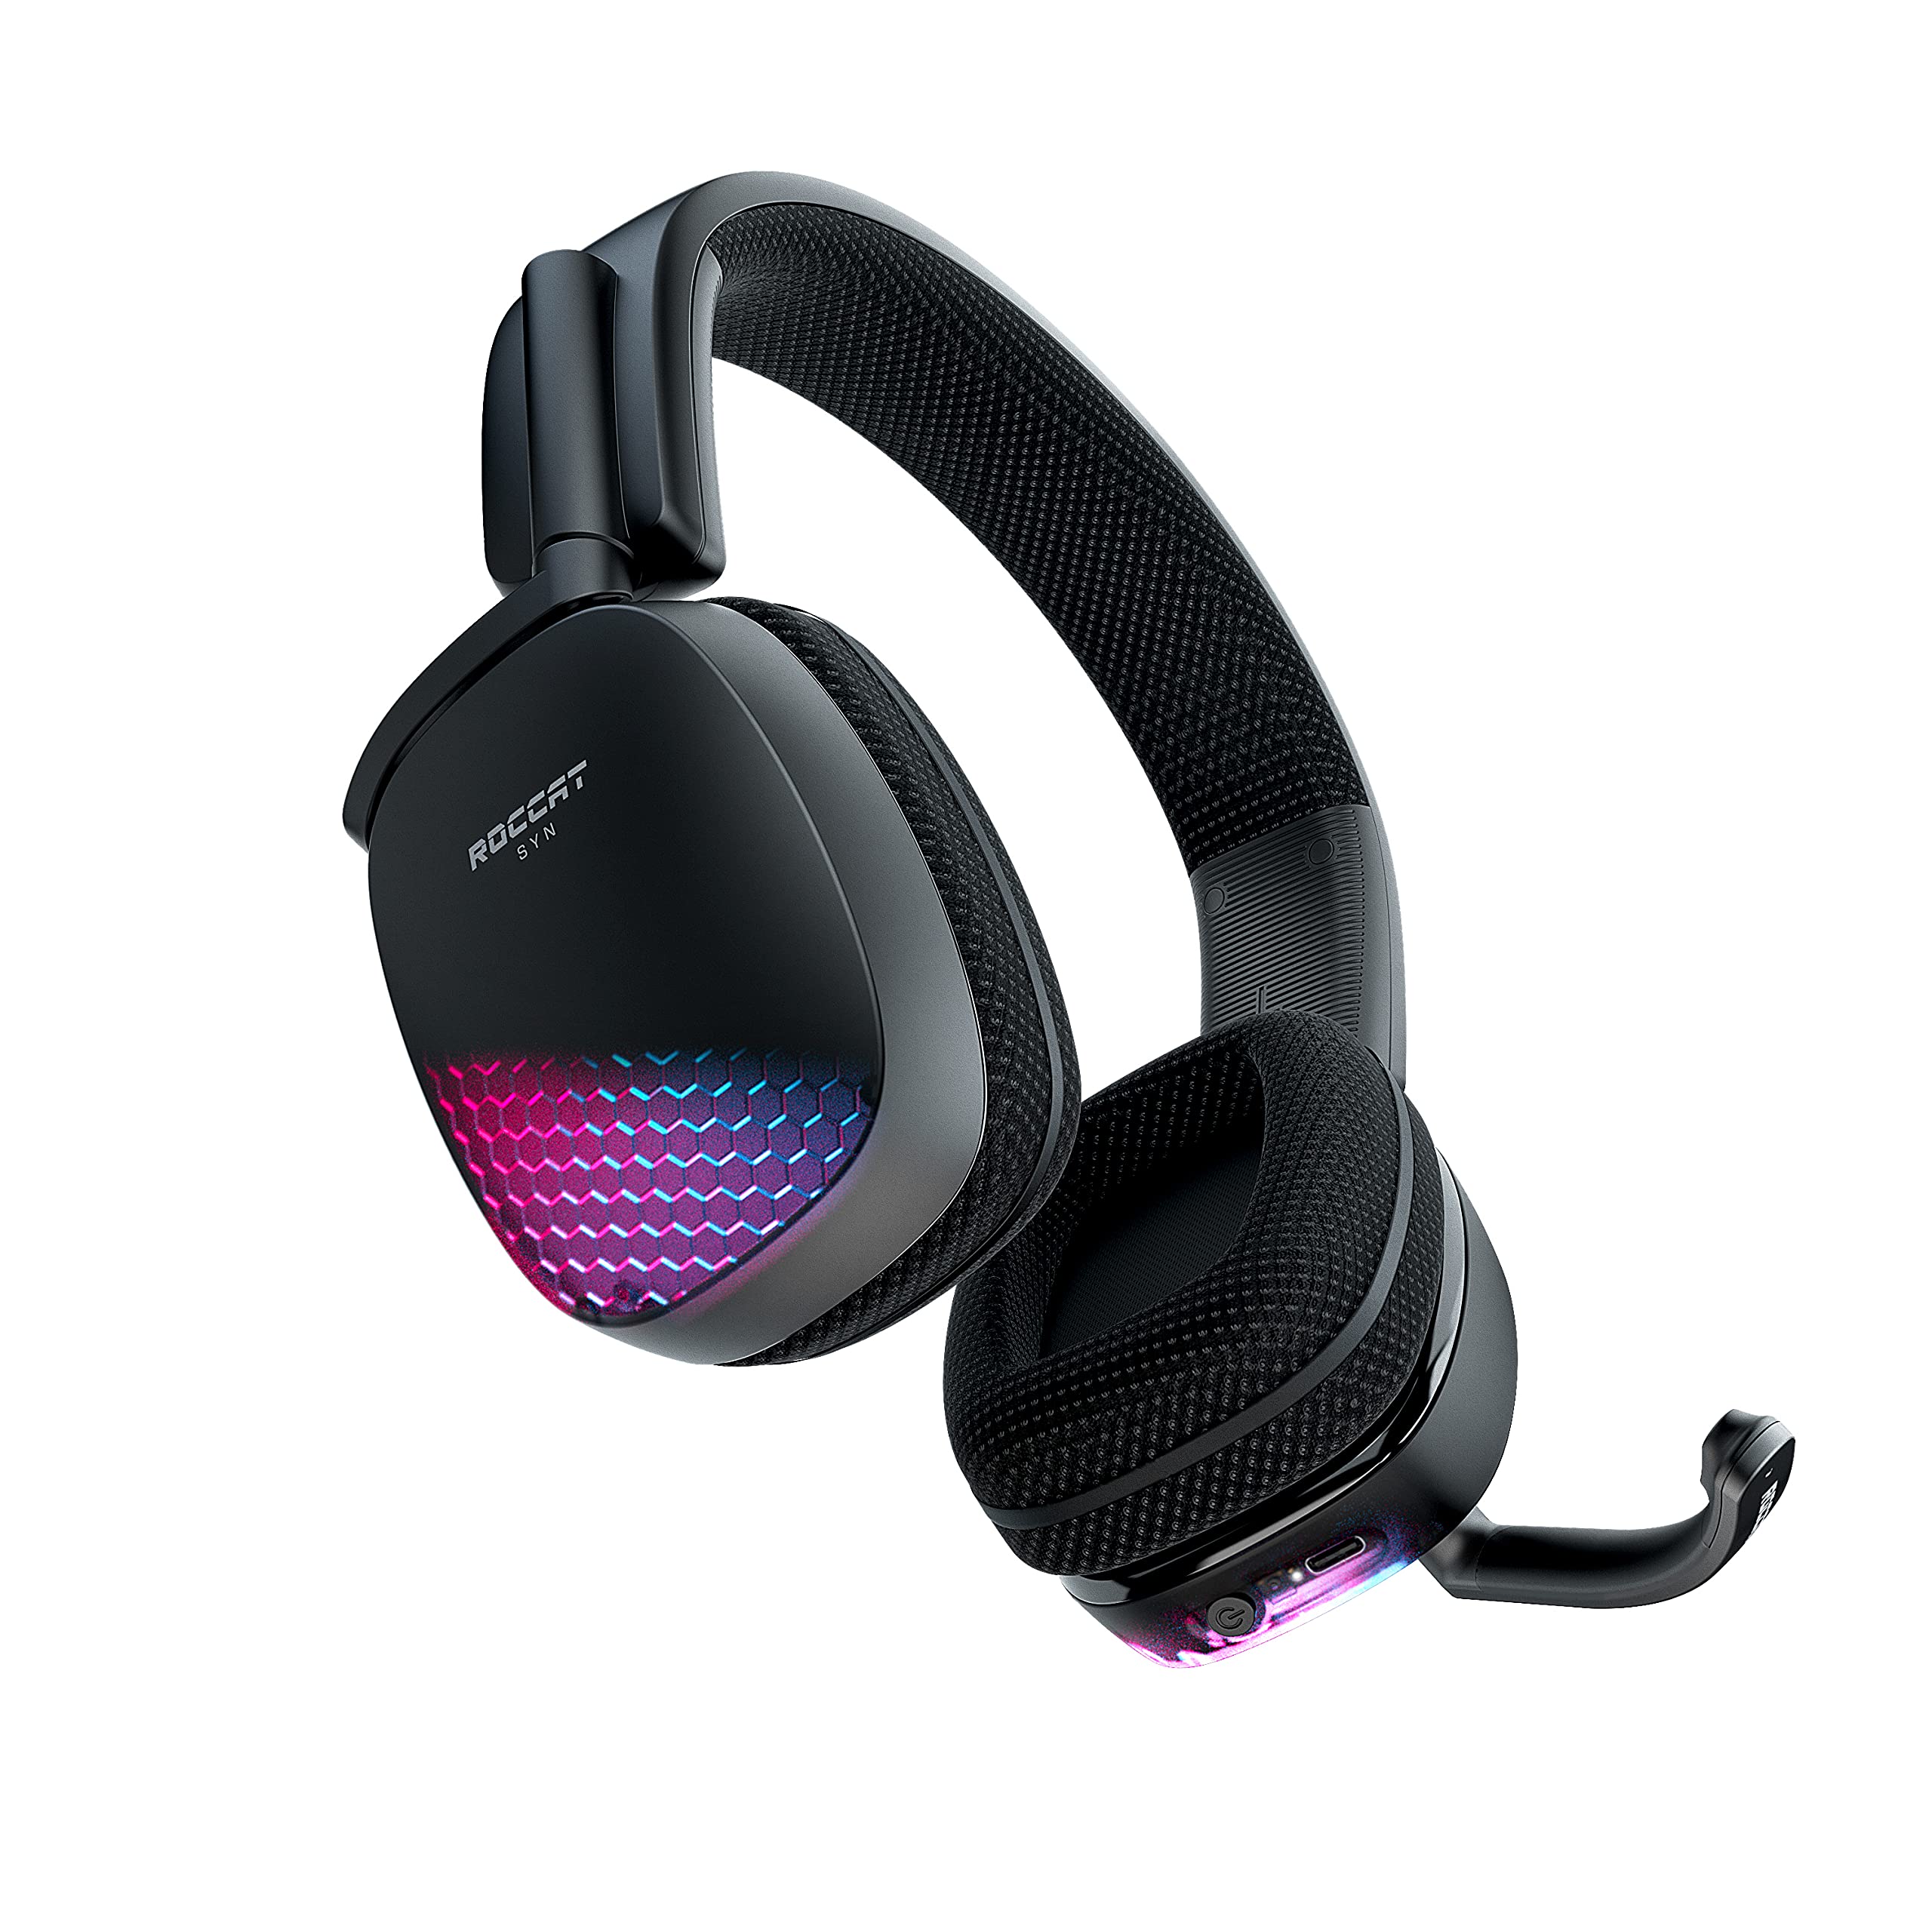 ROCCAT Syn Pro Air Lightweight RGB Wireless 3D Audio Surround Sound PC Gaming Headset w/ AIMO Lighting $50 + Free Shipping